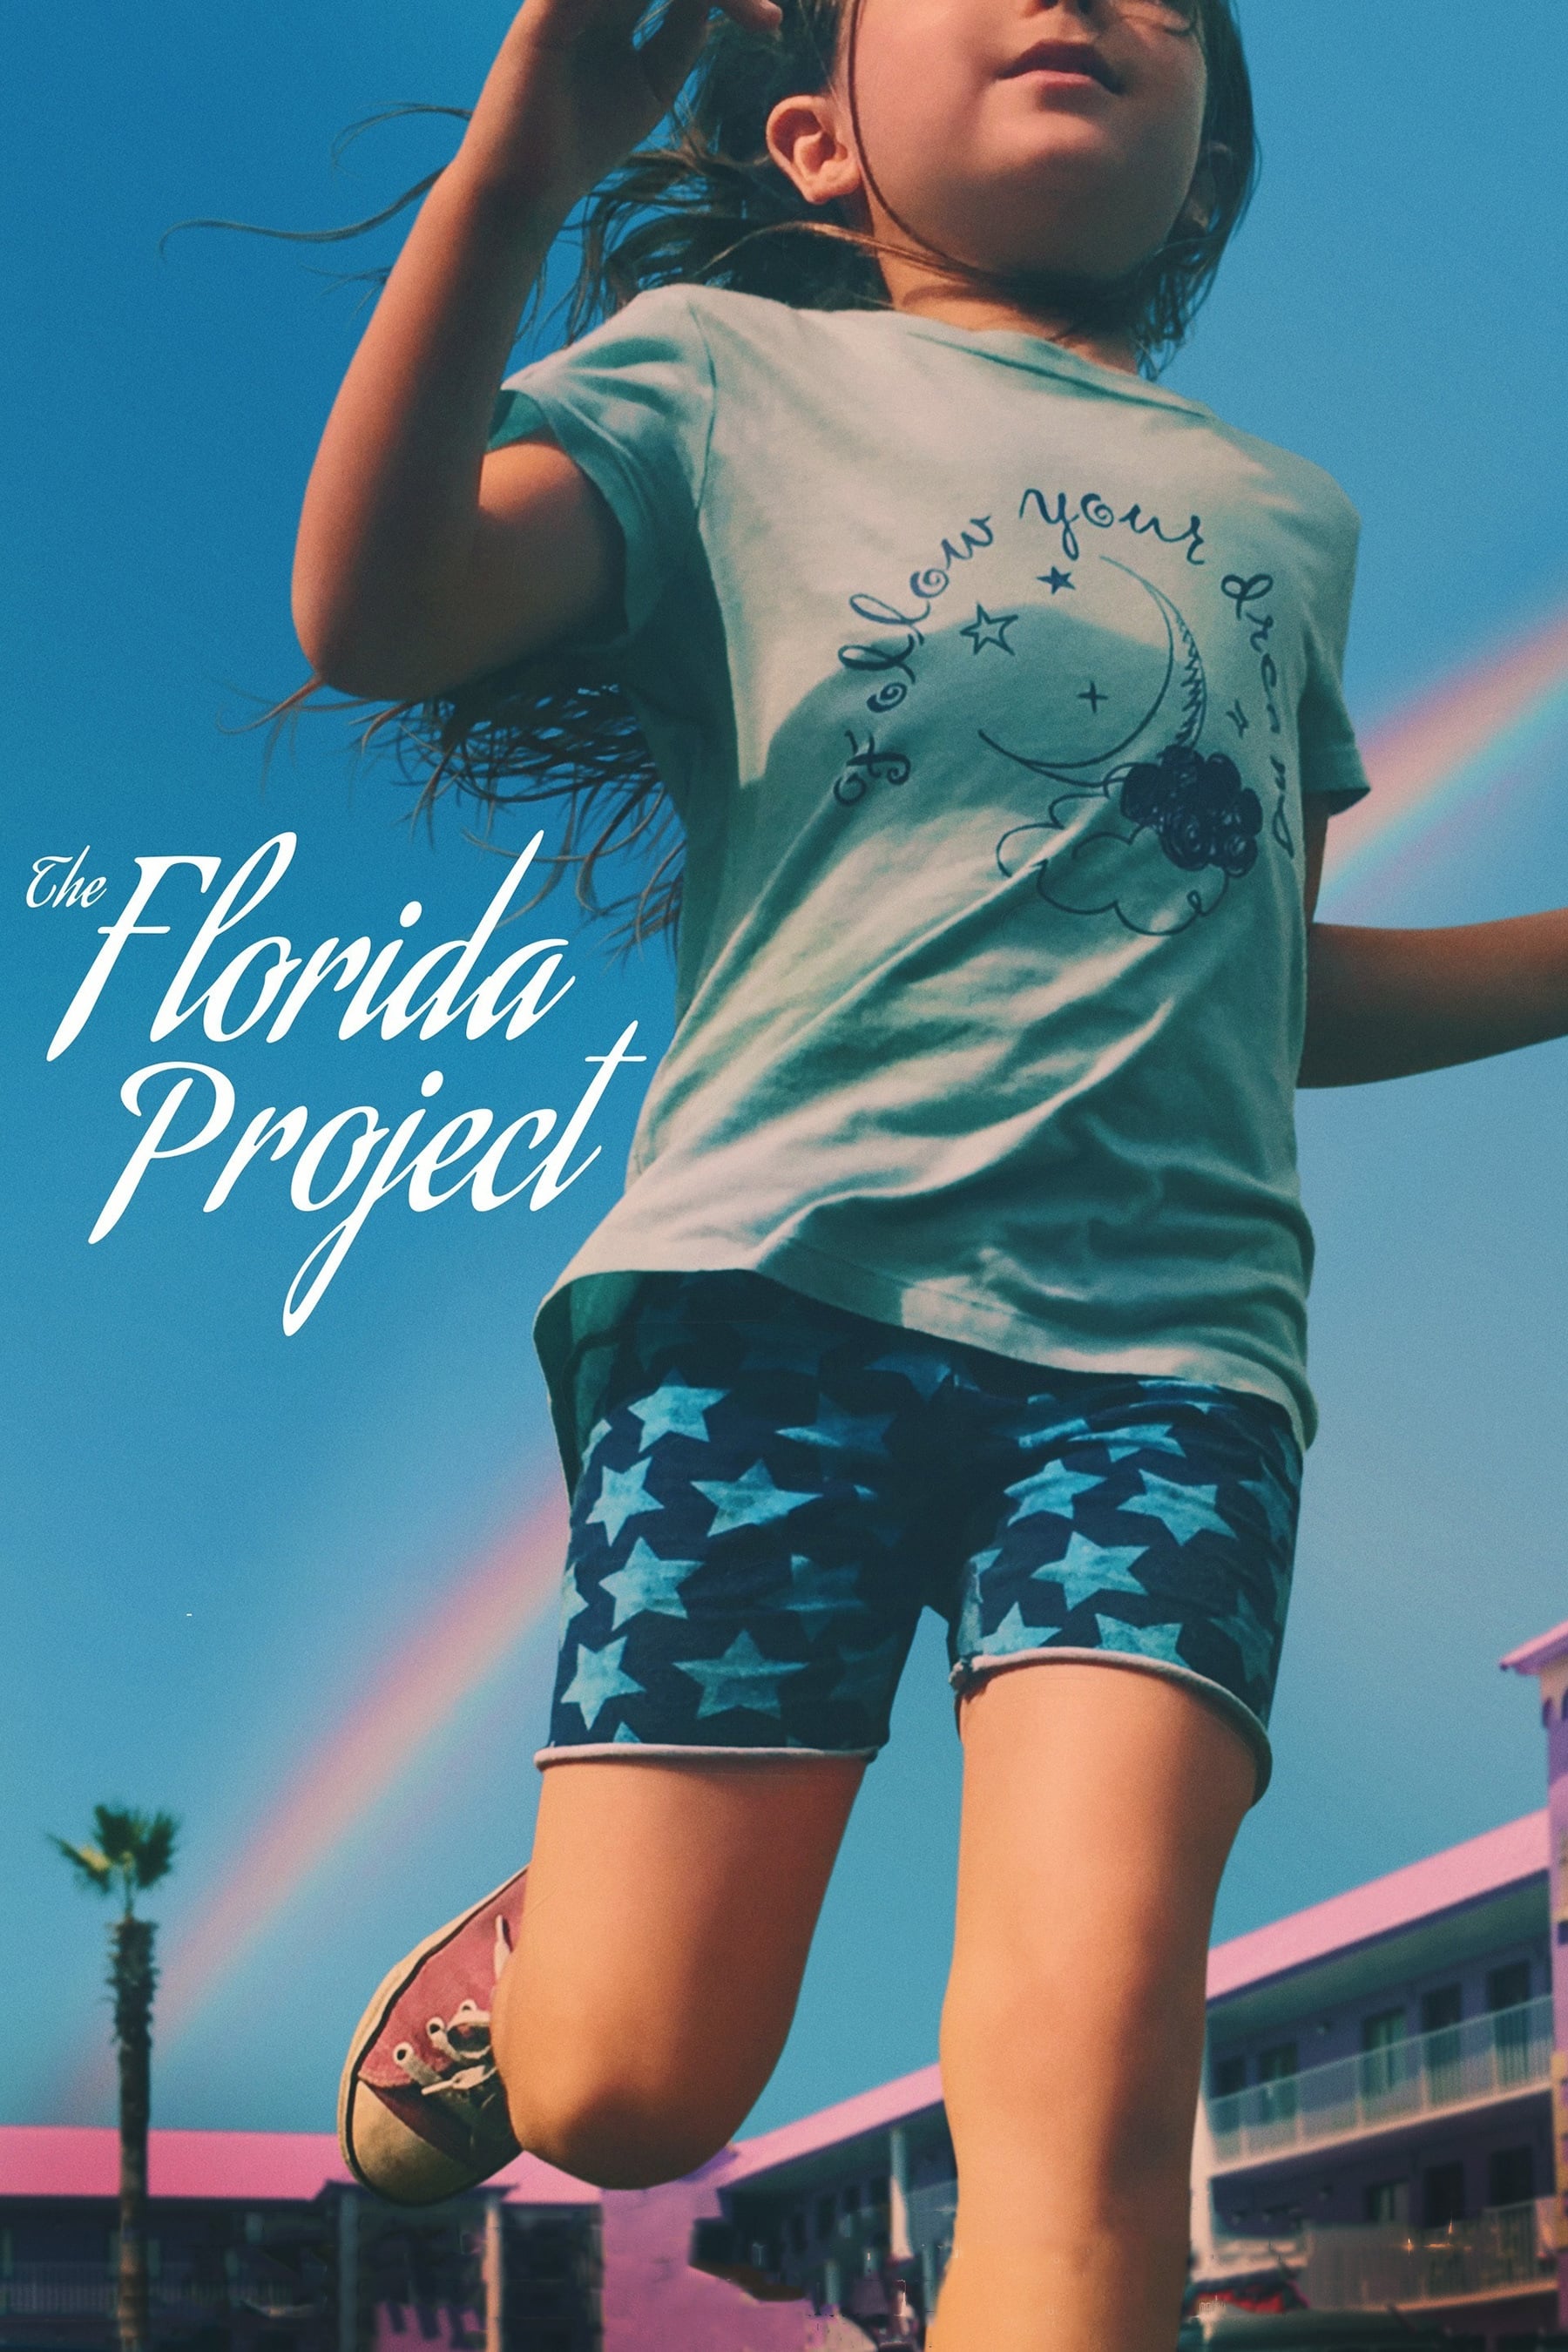 2017 The Florida Project movie poster